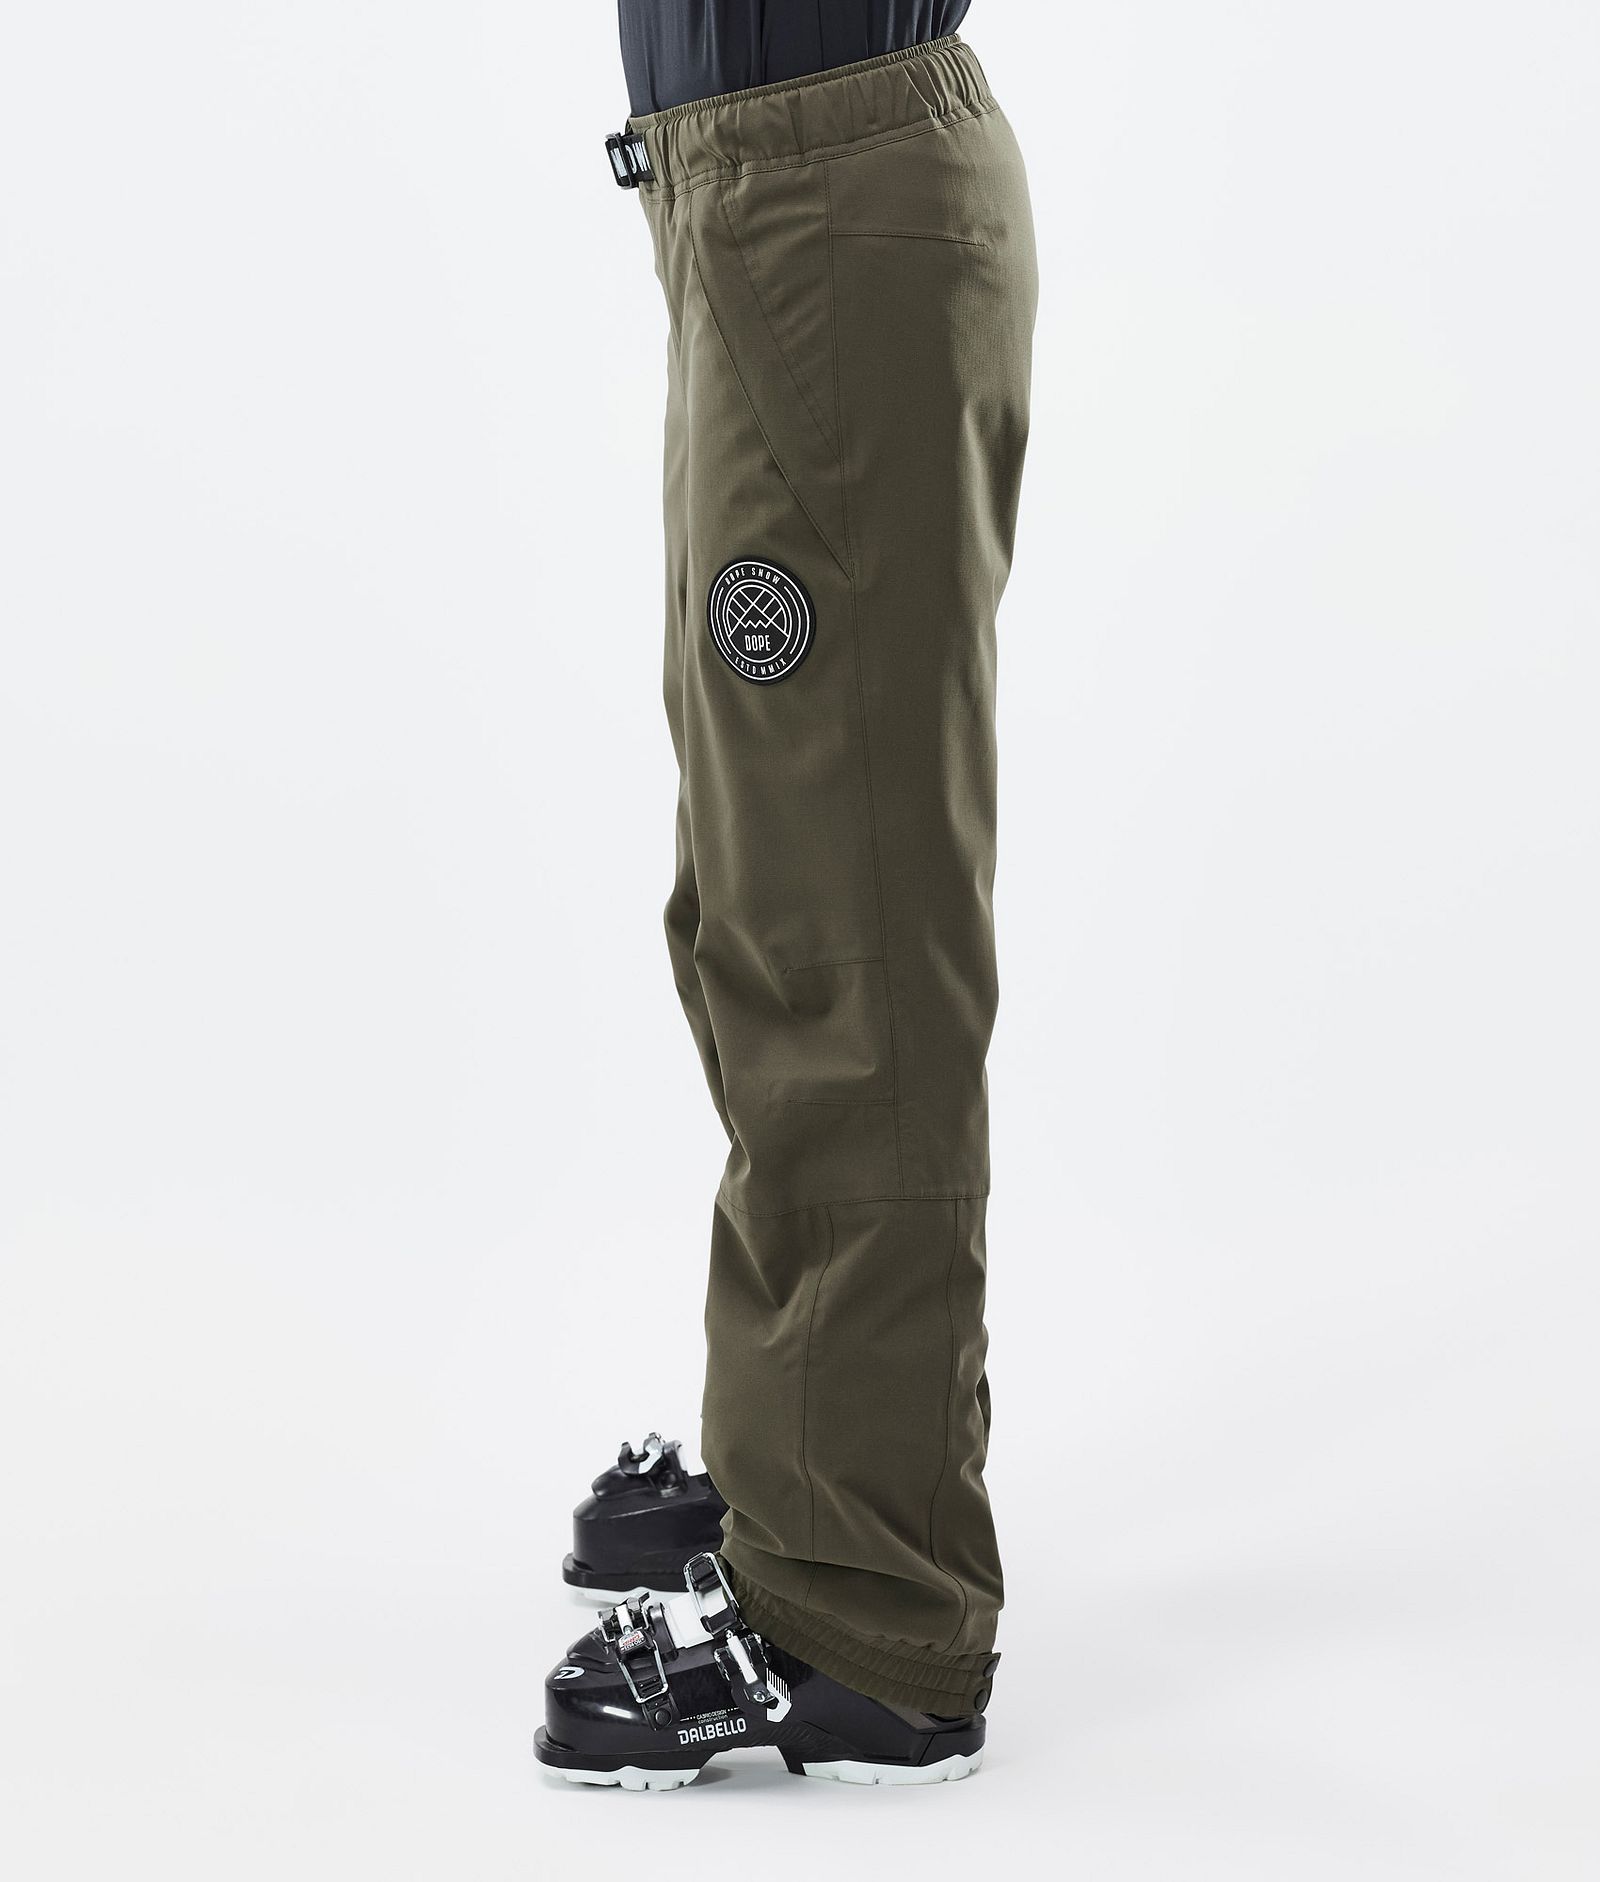 Dope Blizzard W Pantalones Esquí Mujer Olive Green